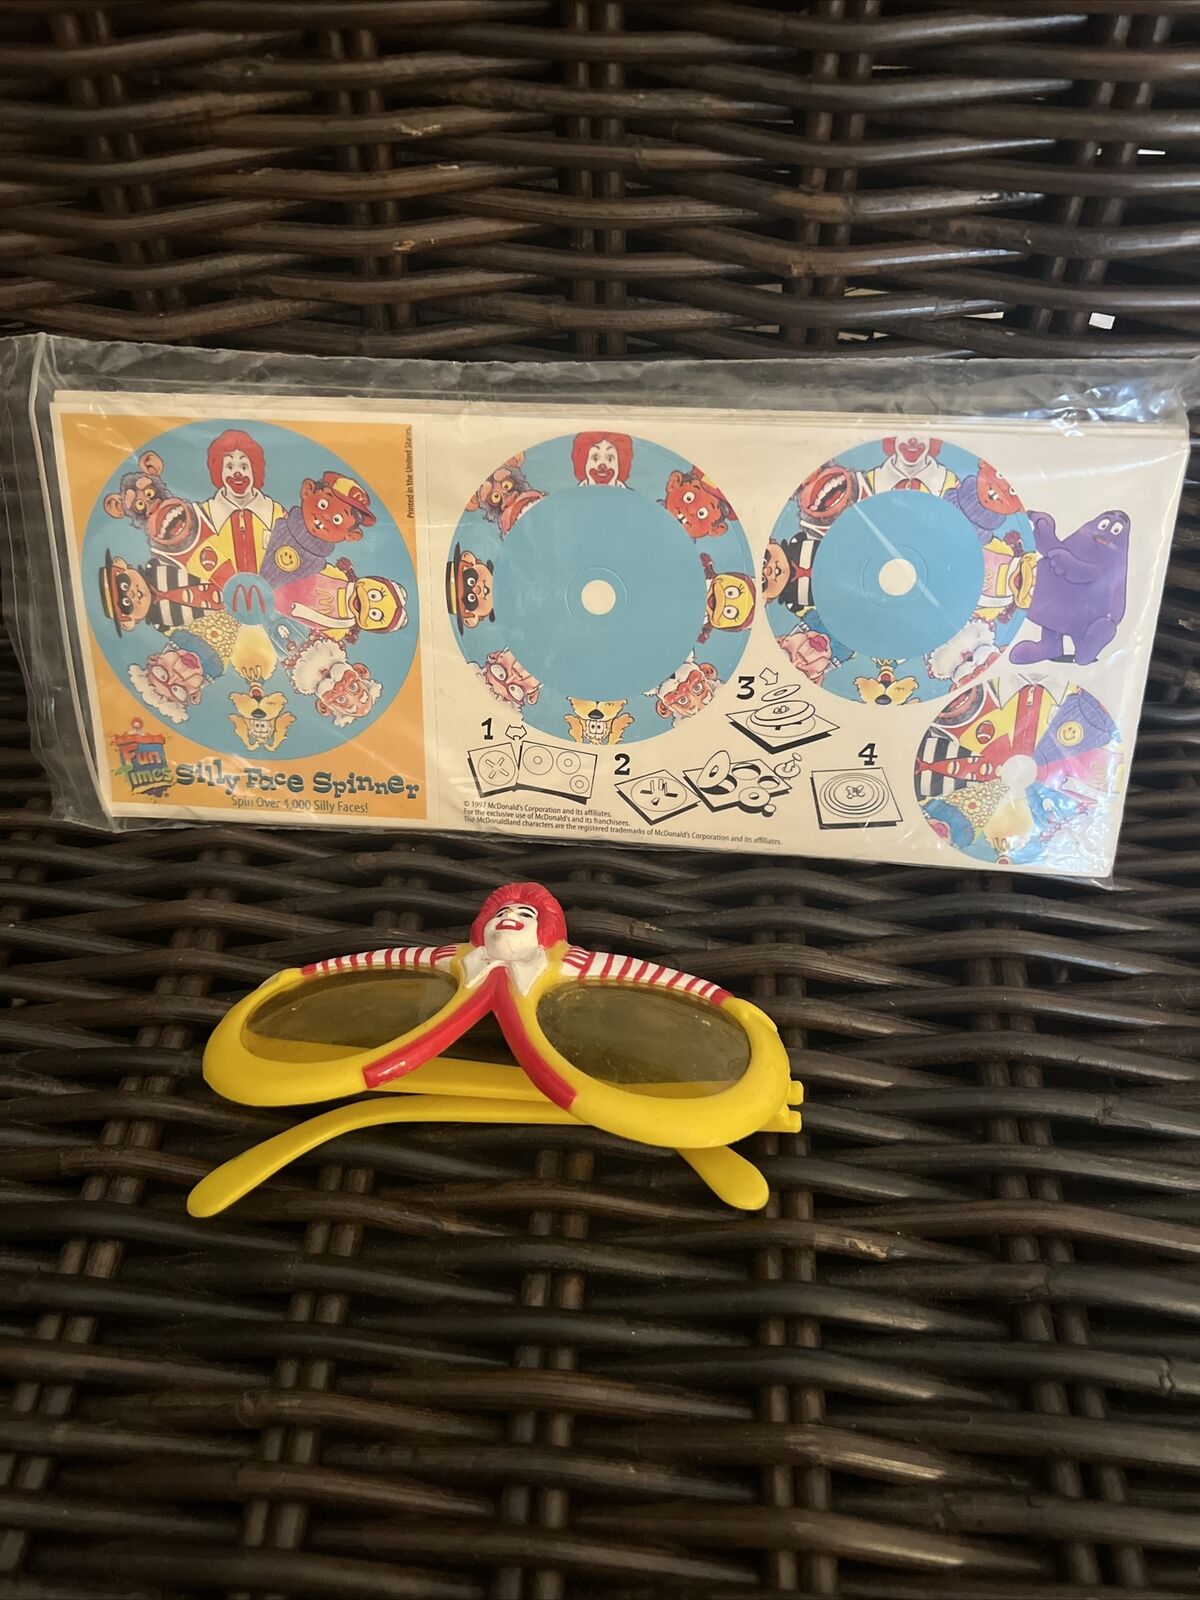 20+ Rare McDonalds Fun Times Silly Face Spinner Game 1997 & Ronald Sun Glasses